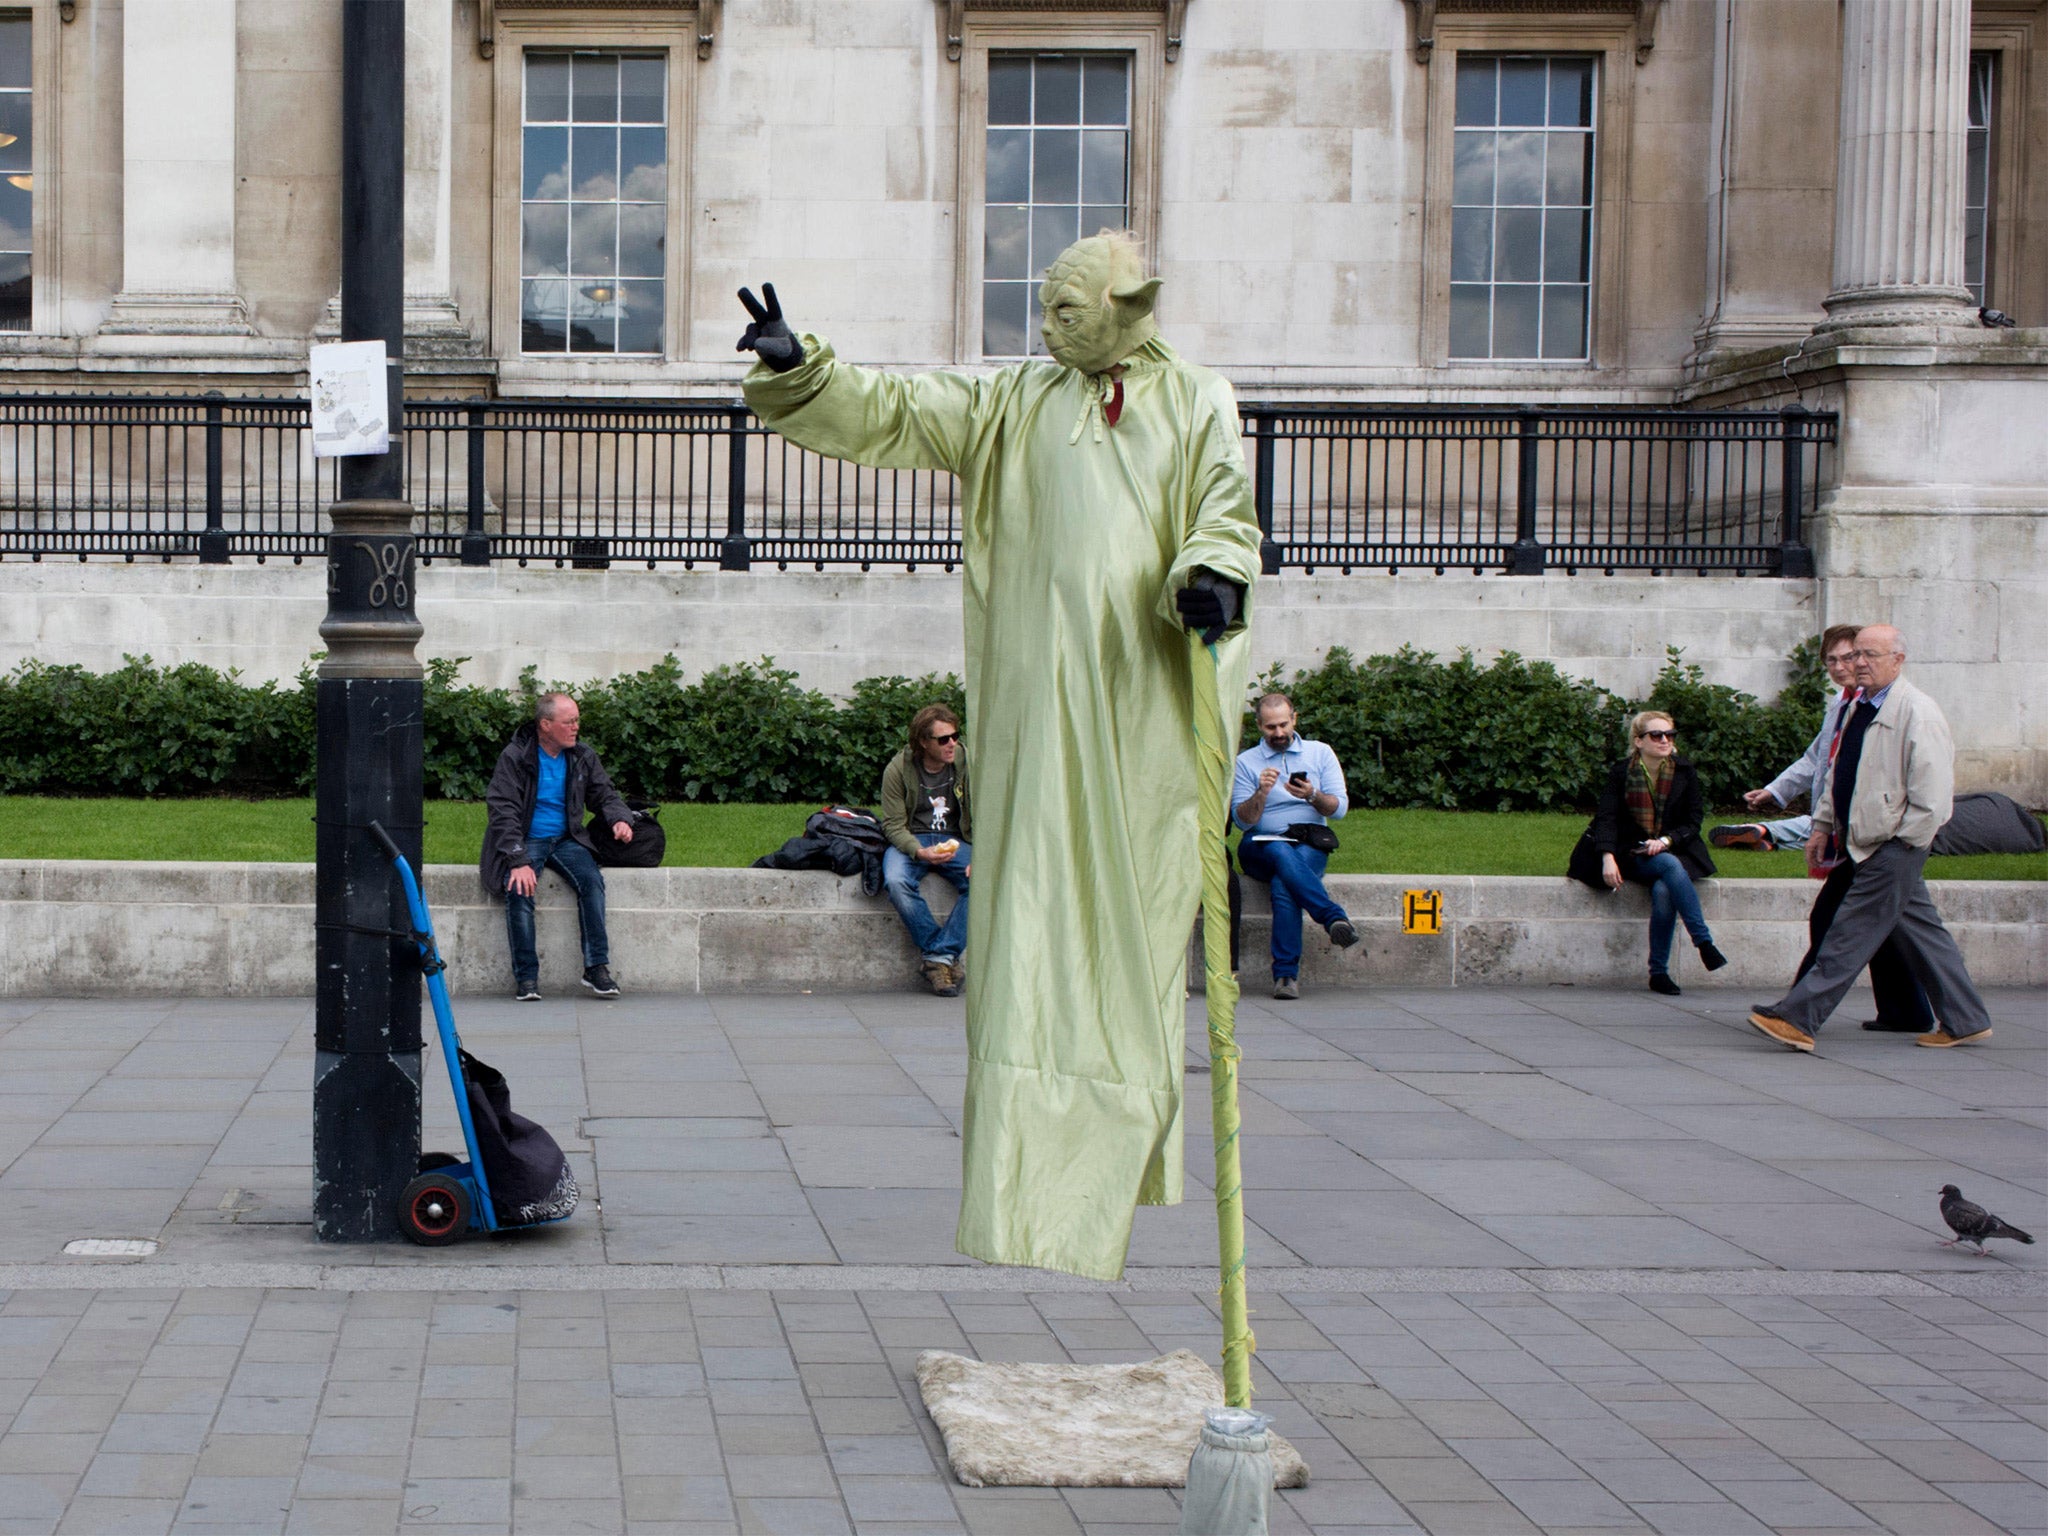 The National Gallery is under siege by street performers